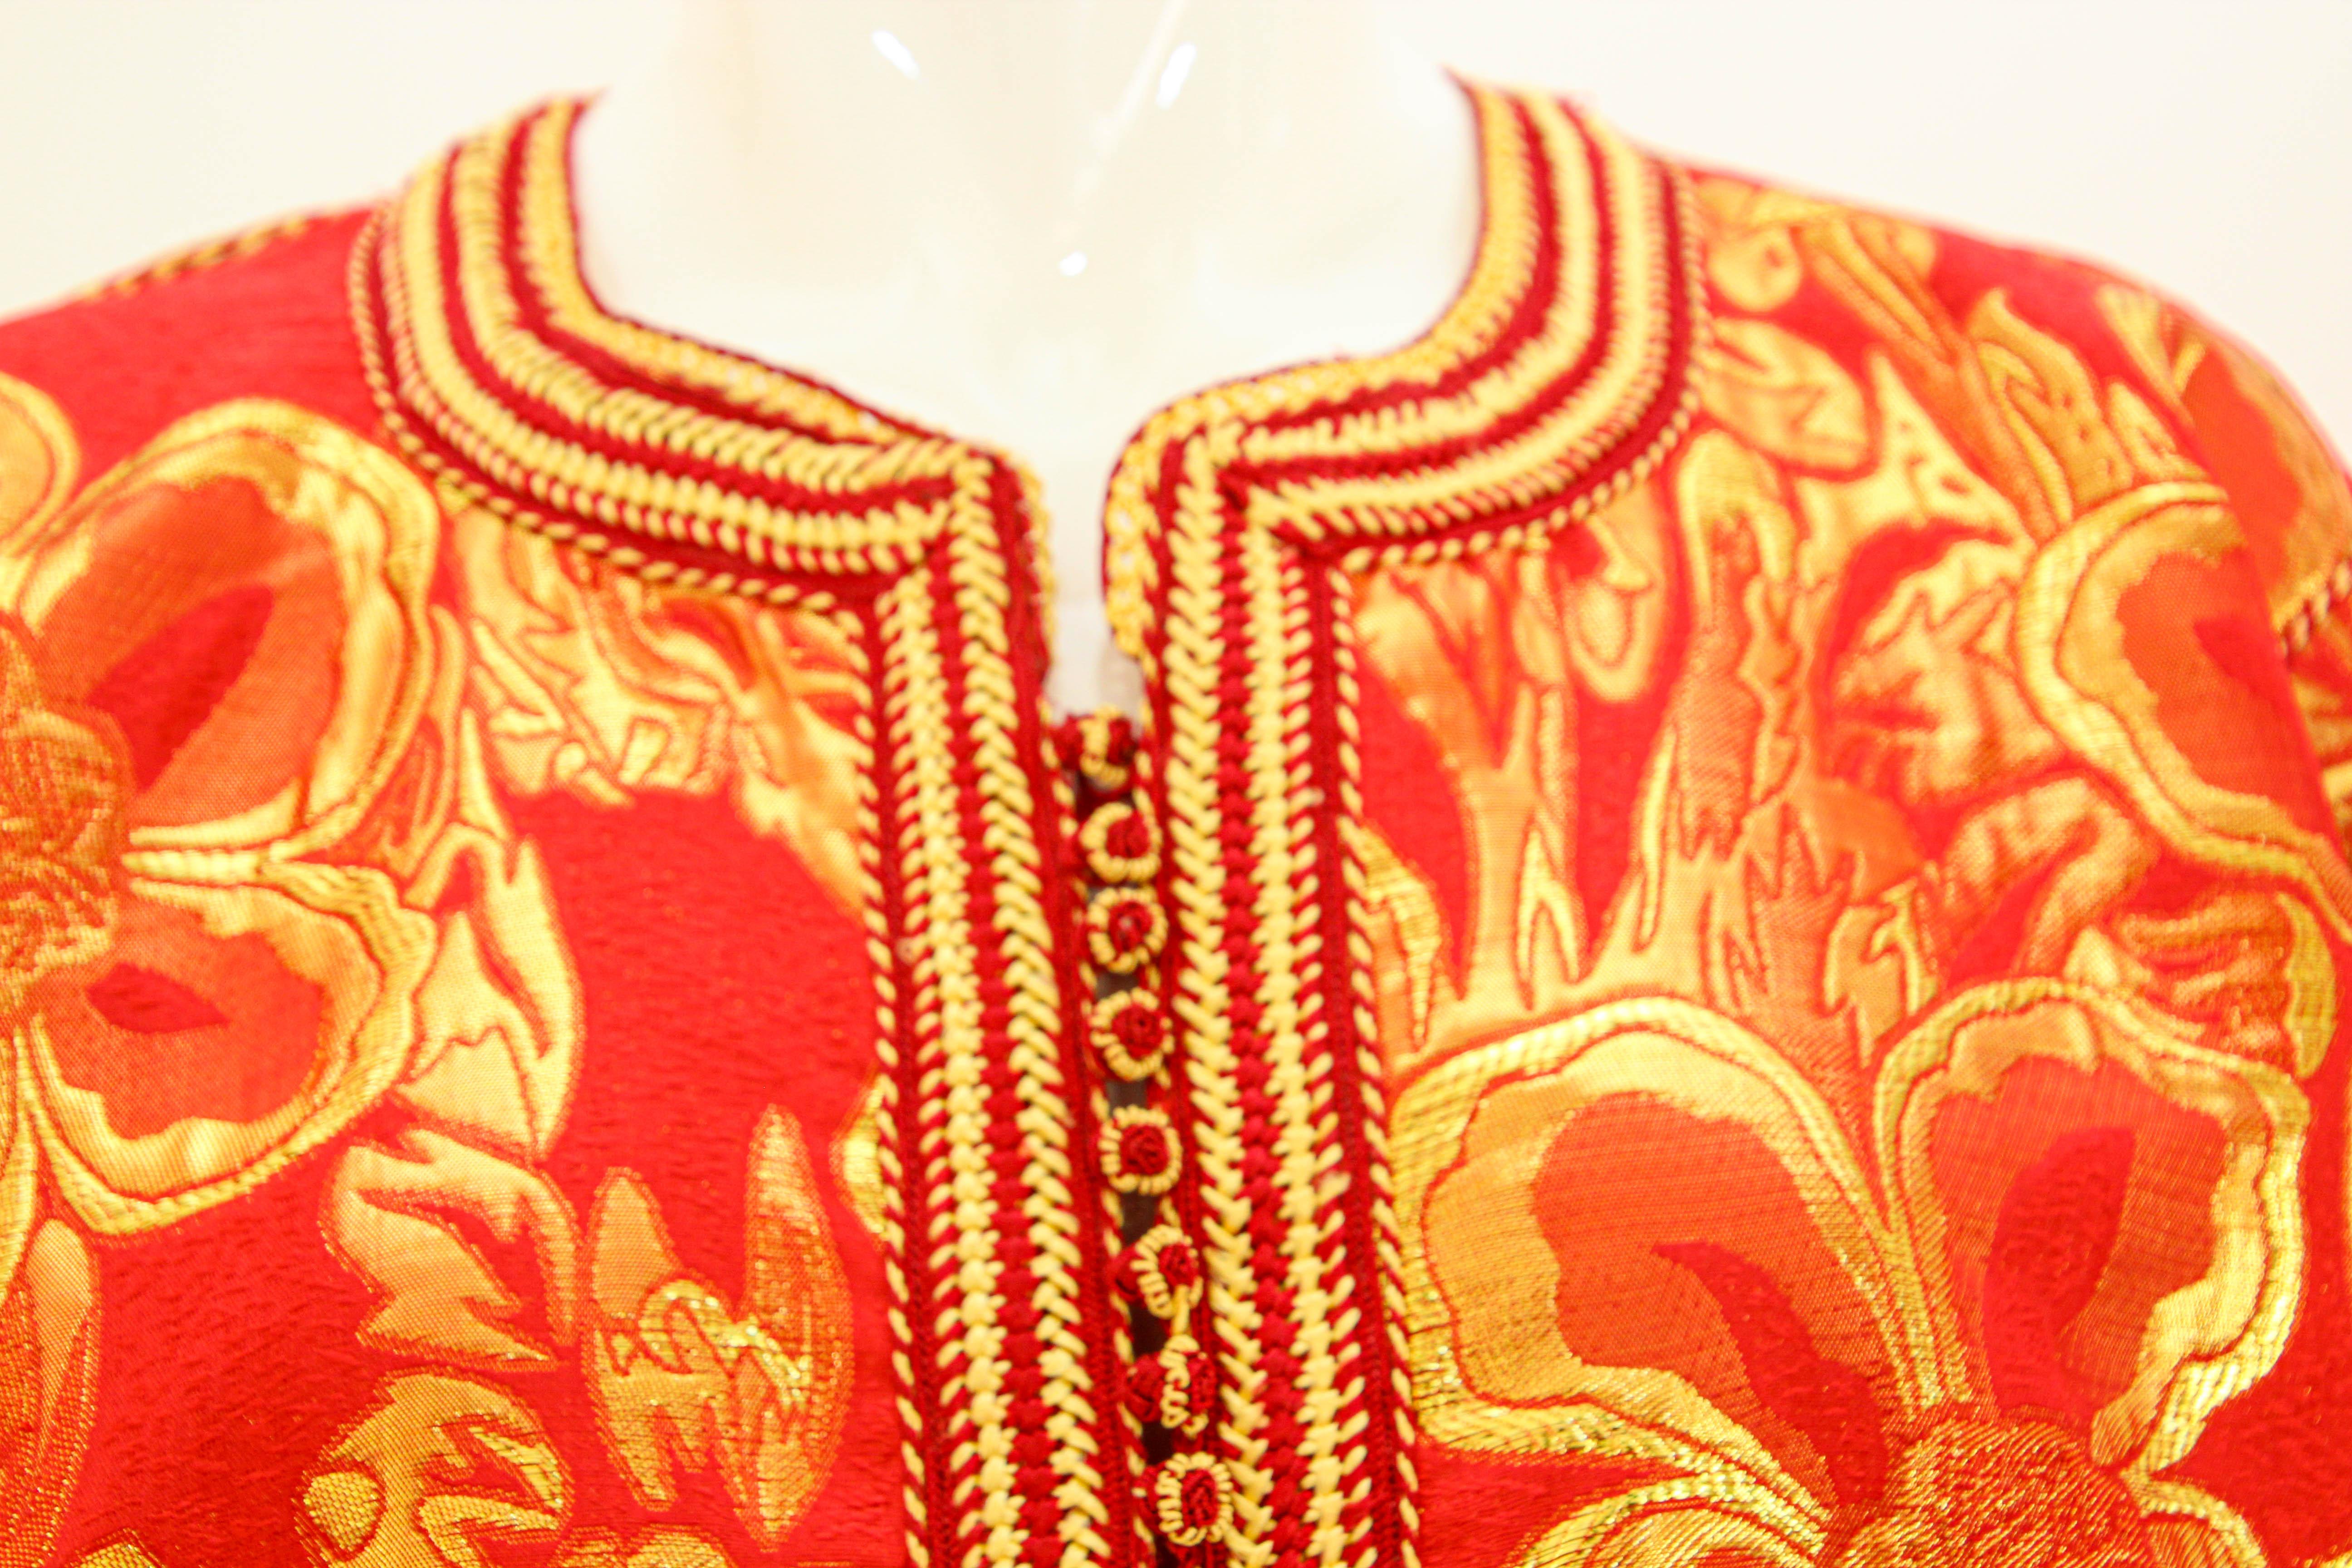 1970s Vintage Moroccan Kaftan Red and Gold Brocade Caftan Maxi Dress For Sale 2